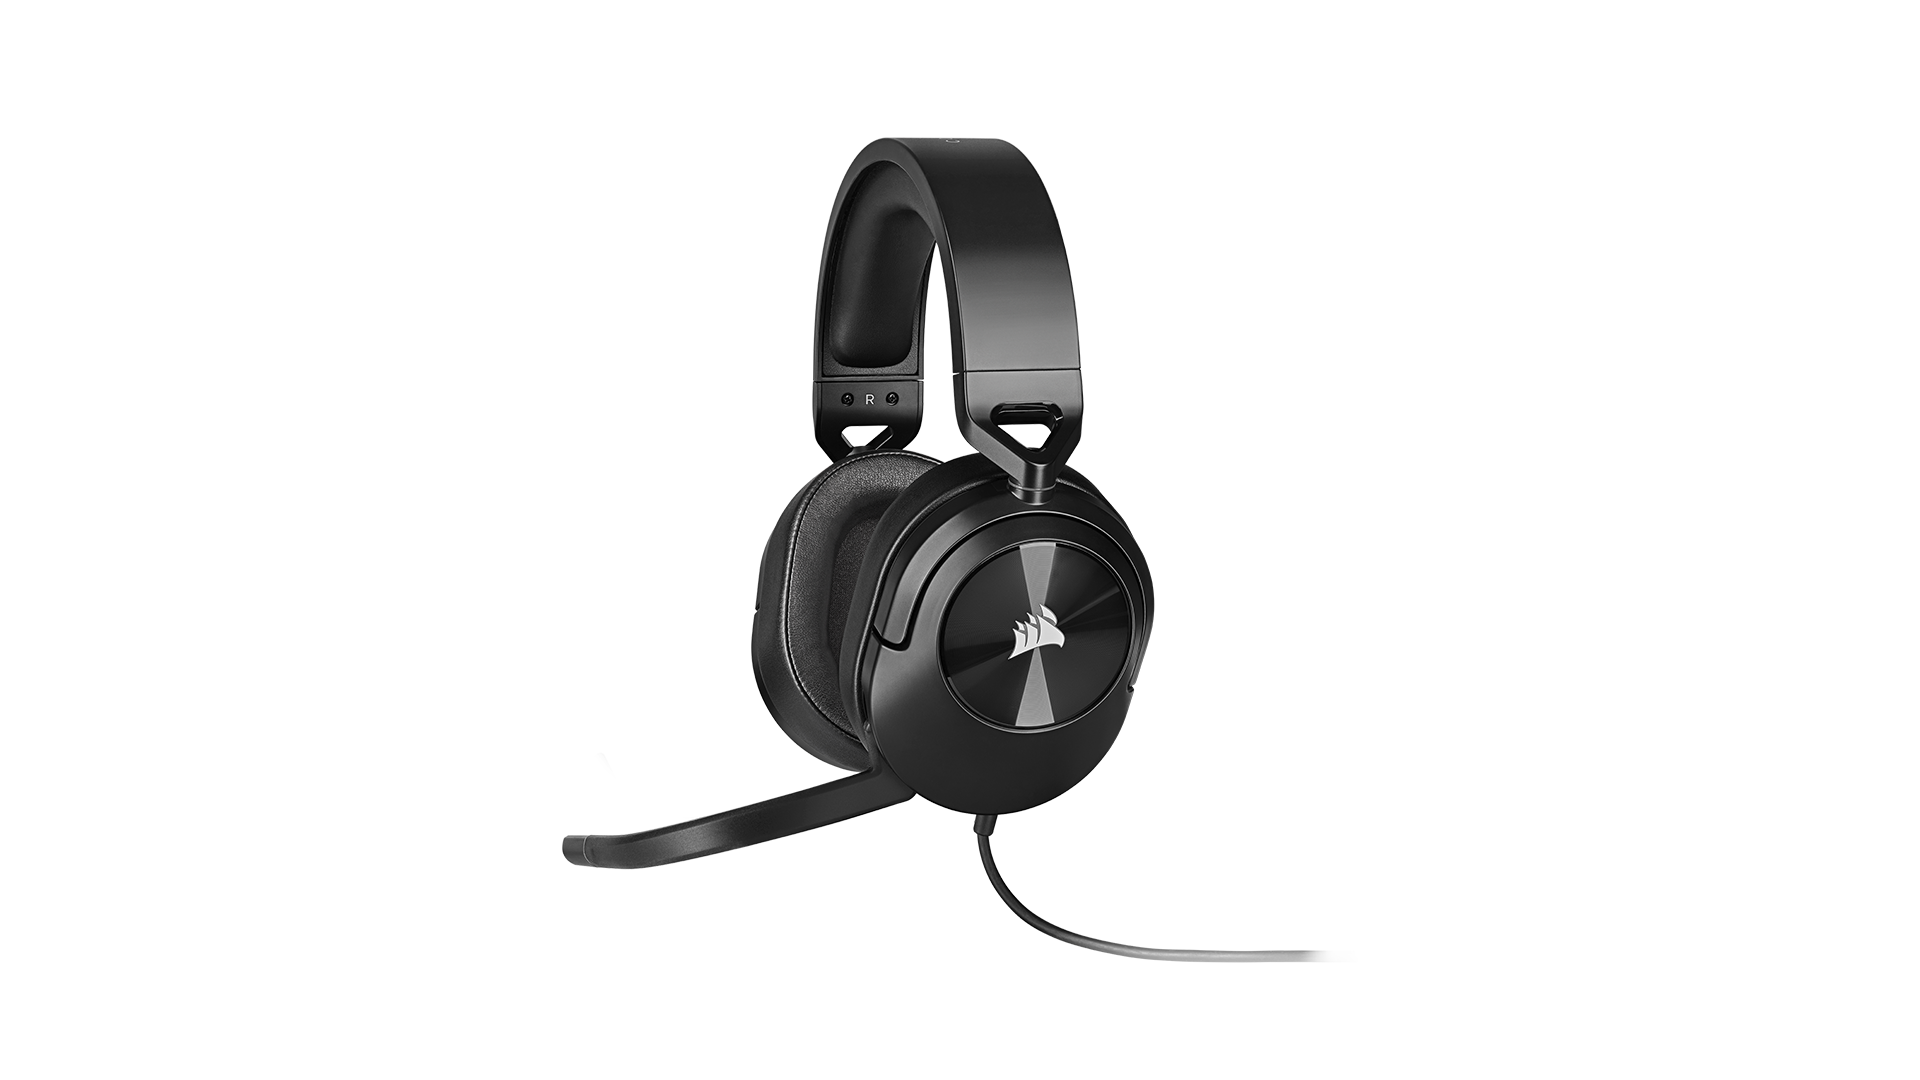 https://cwsmgmt.corsair.com/pdp/headsets/hs55-stereo/assets/images/hs55_stereo_blk_hero.png